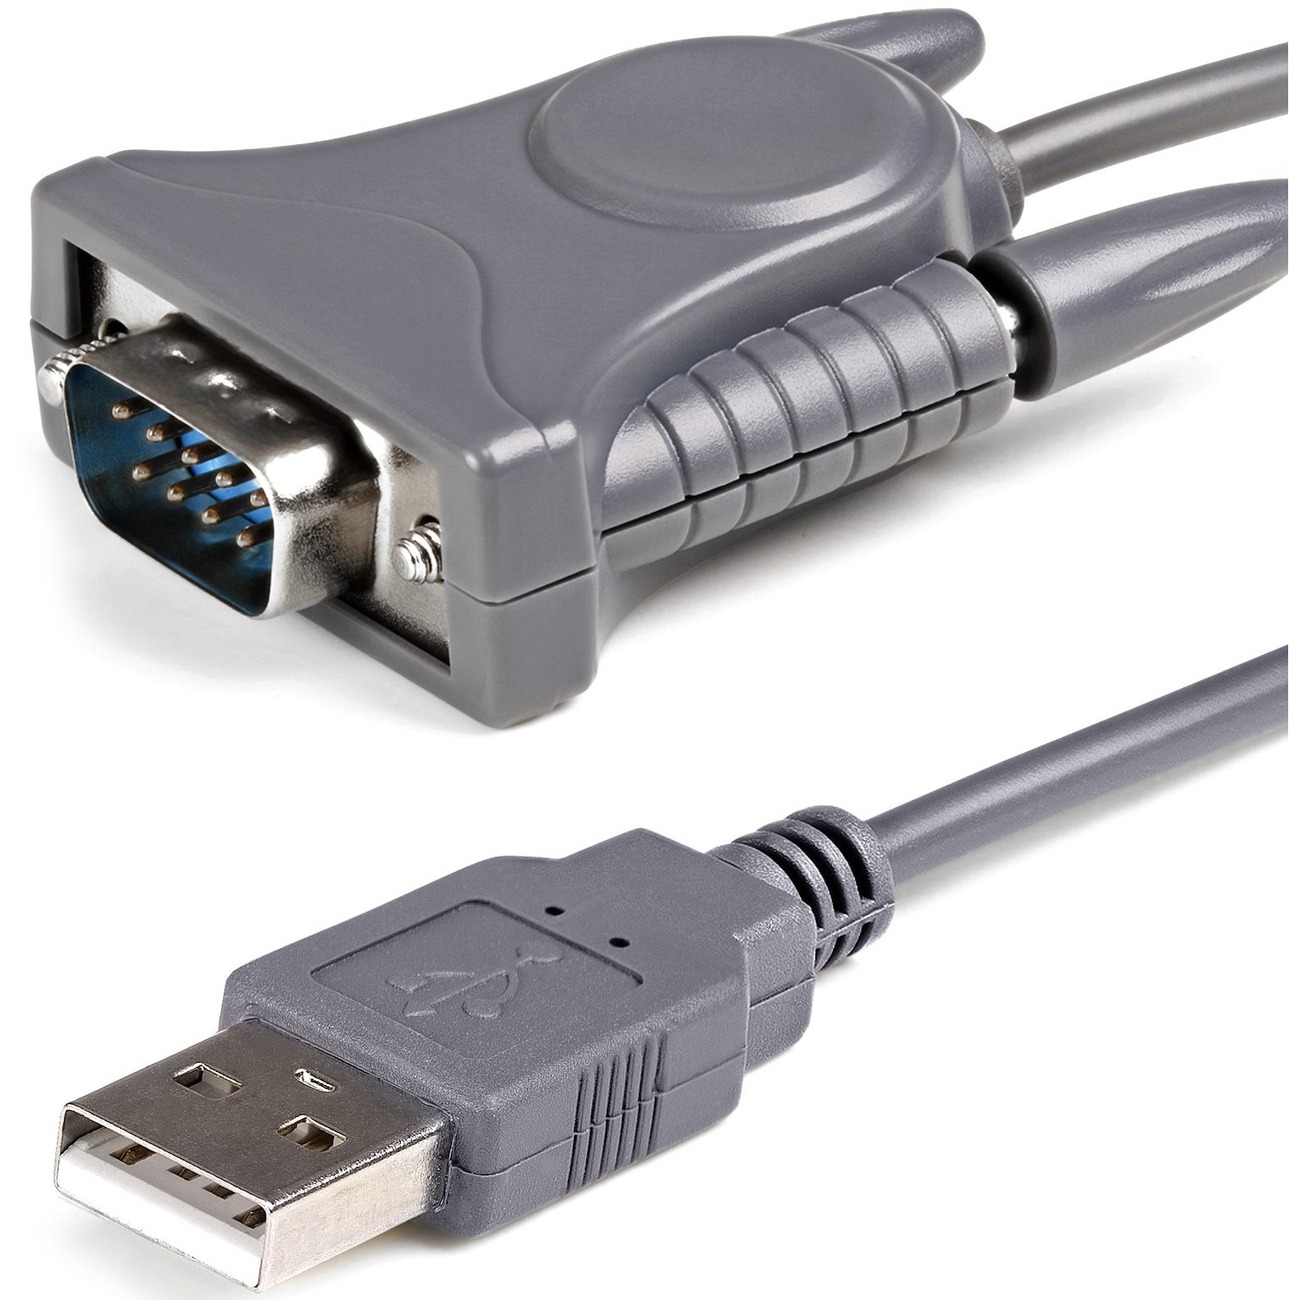 StarTech.com USB to Serial - 3 ft 1m - with to DB25 Pin Adapter - Prolific PL-2303 - USB to RS232 Adapter Cable - Add an RS232 serial port